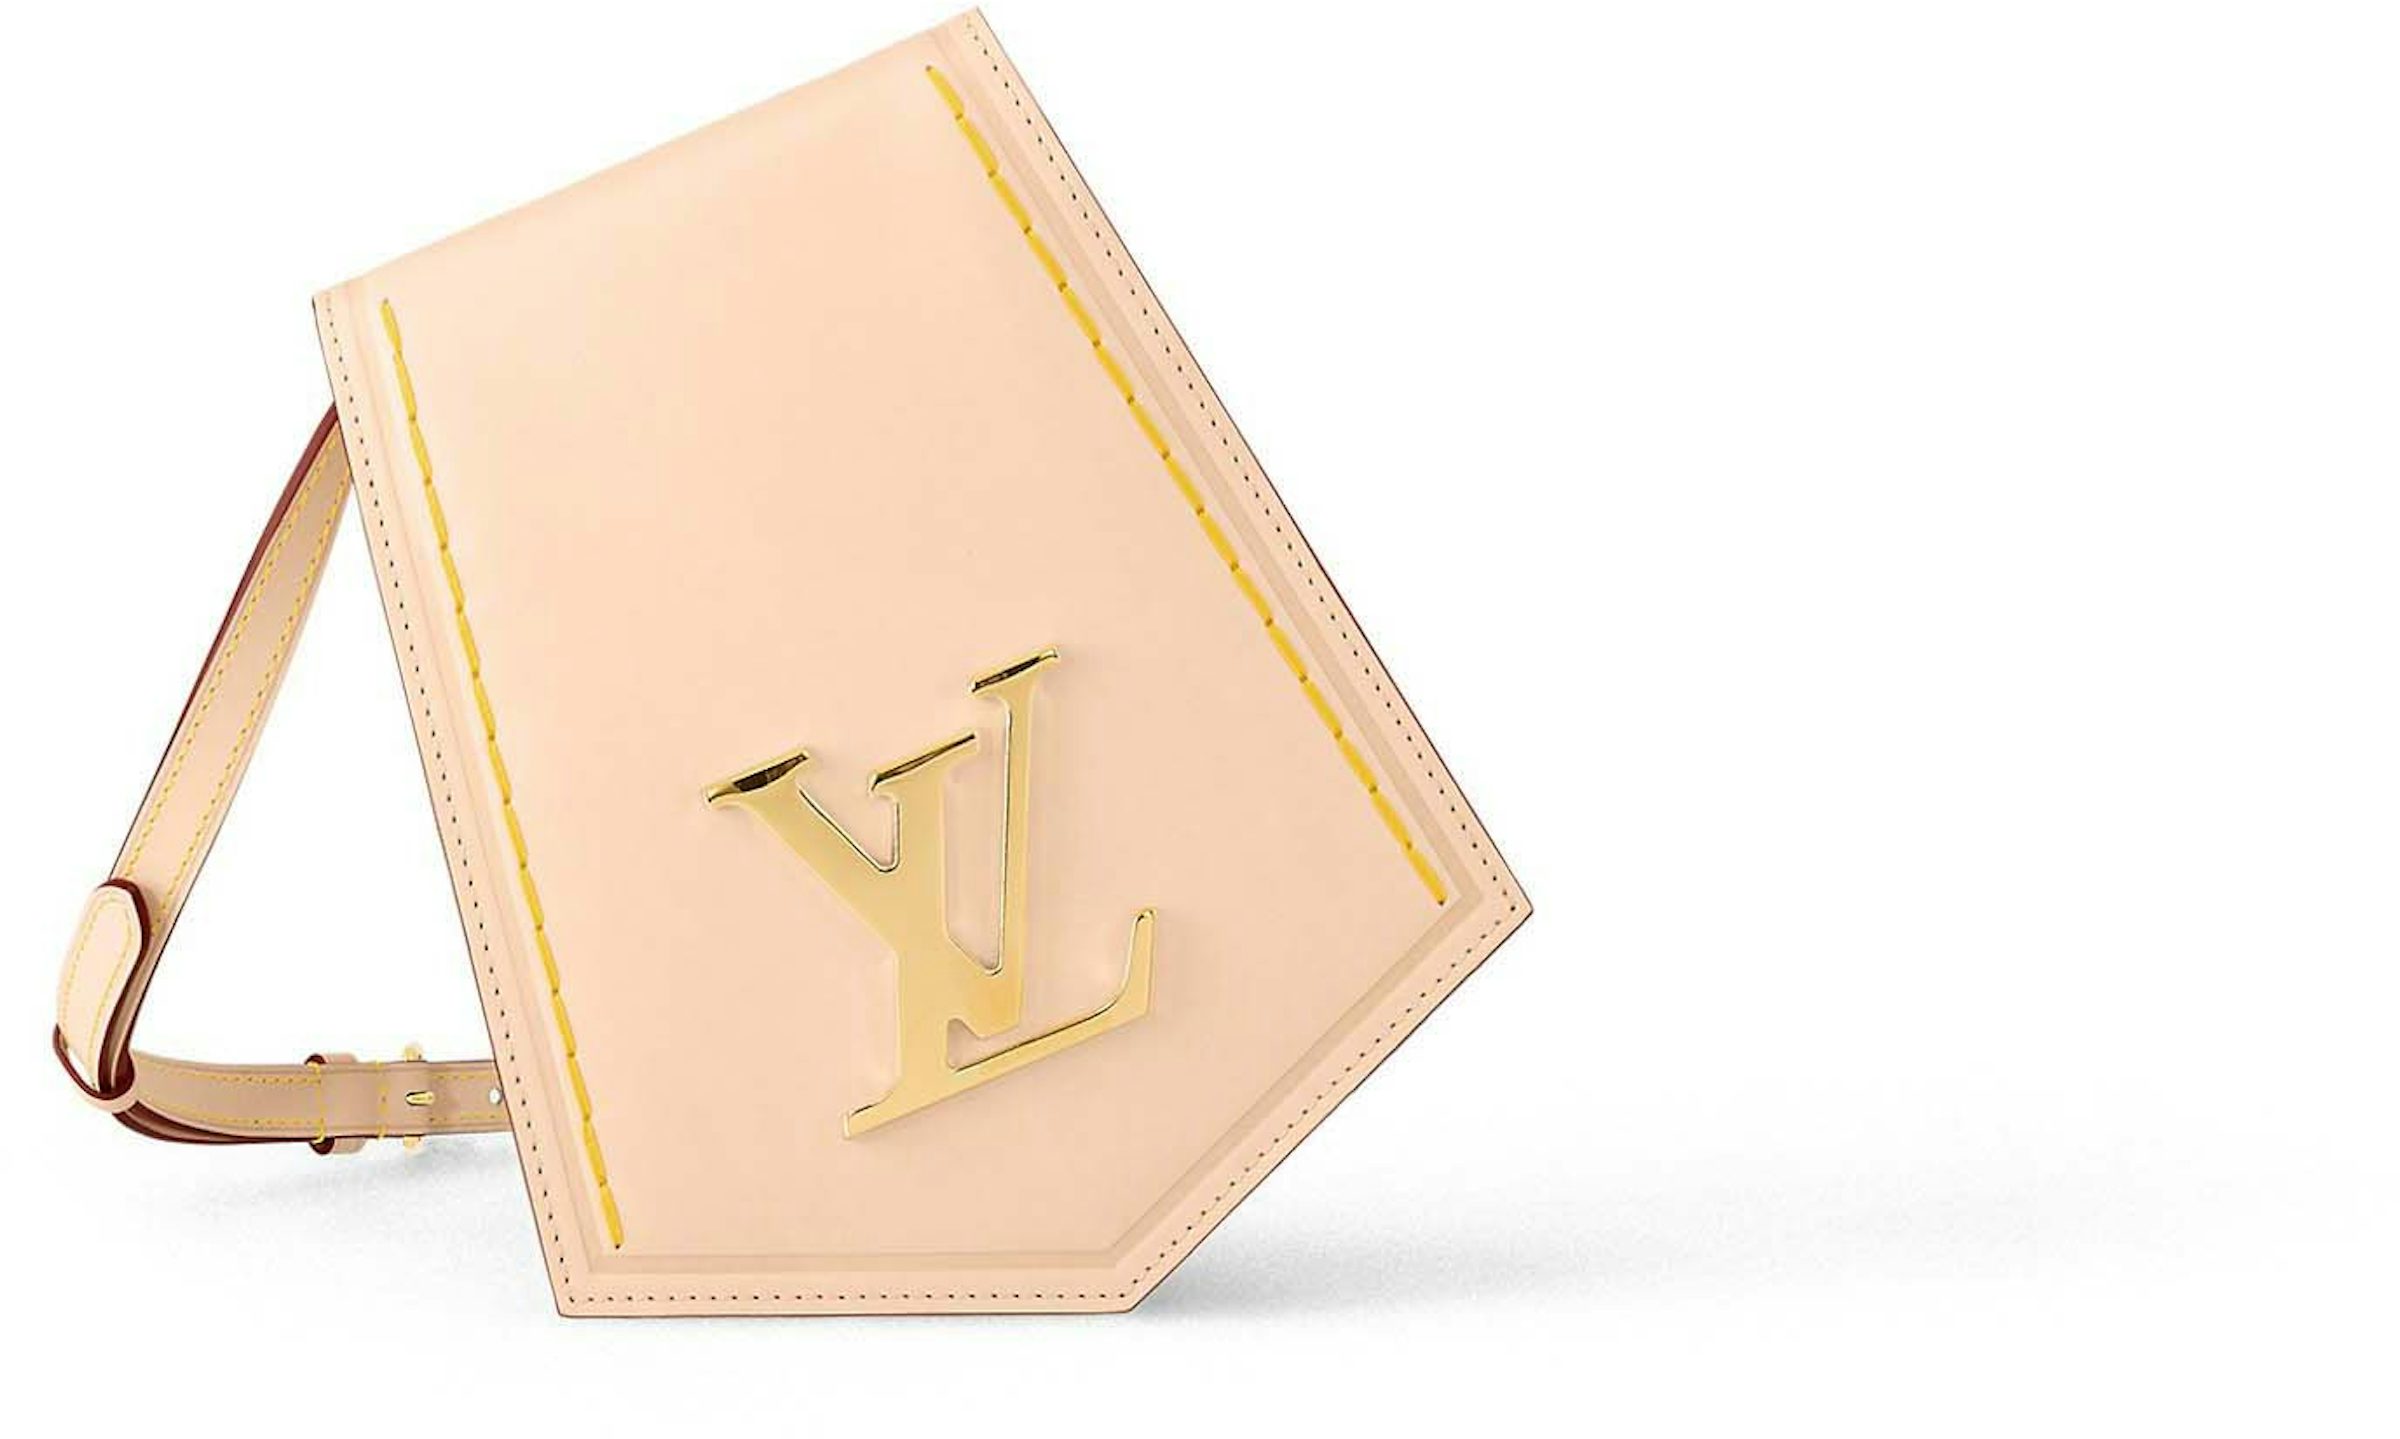 Louis Vuitton, Accessories, Red Epi Leather Louis Vuitton 6 Key Holder  With Goldtone Hardware